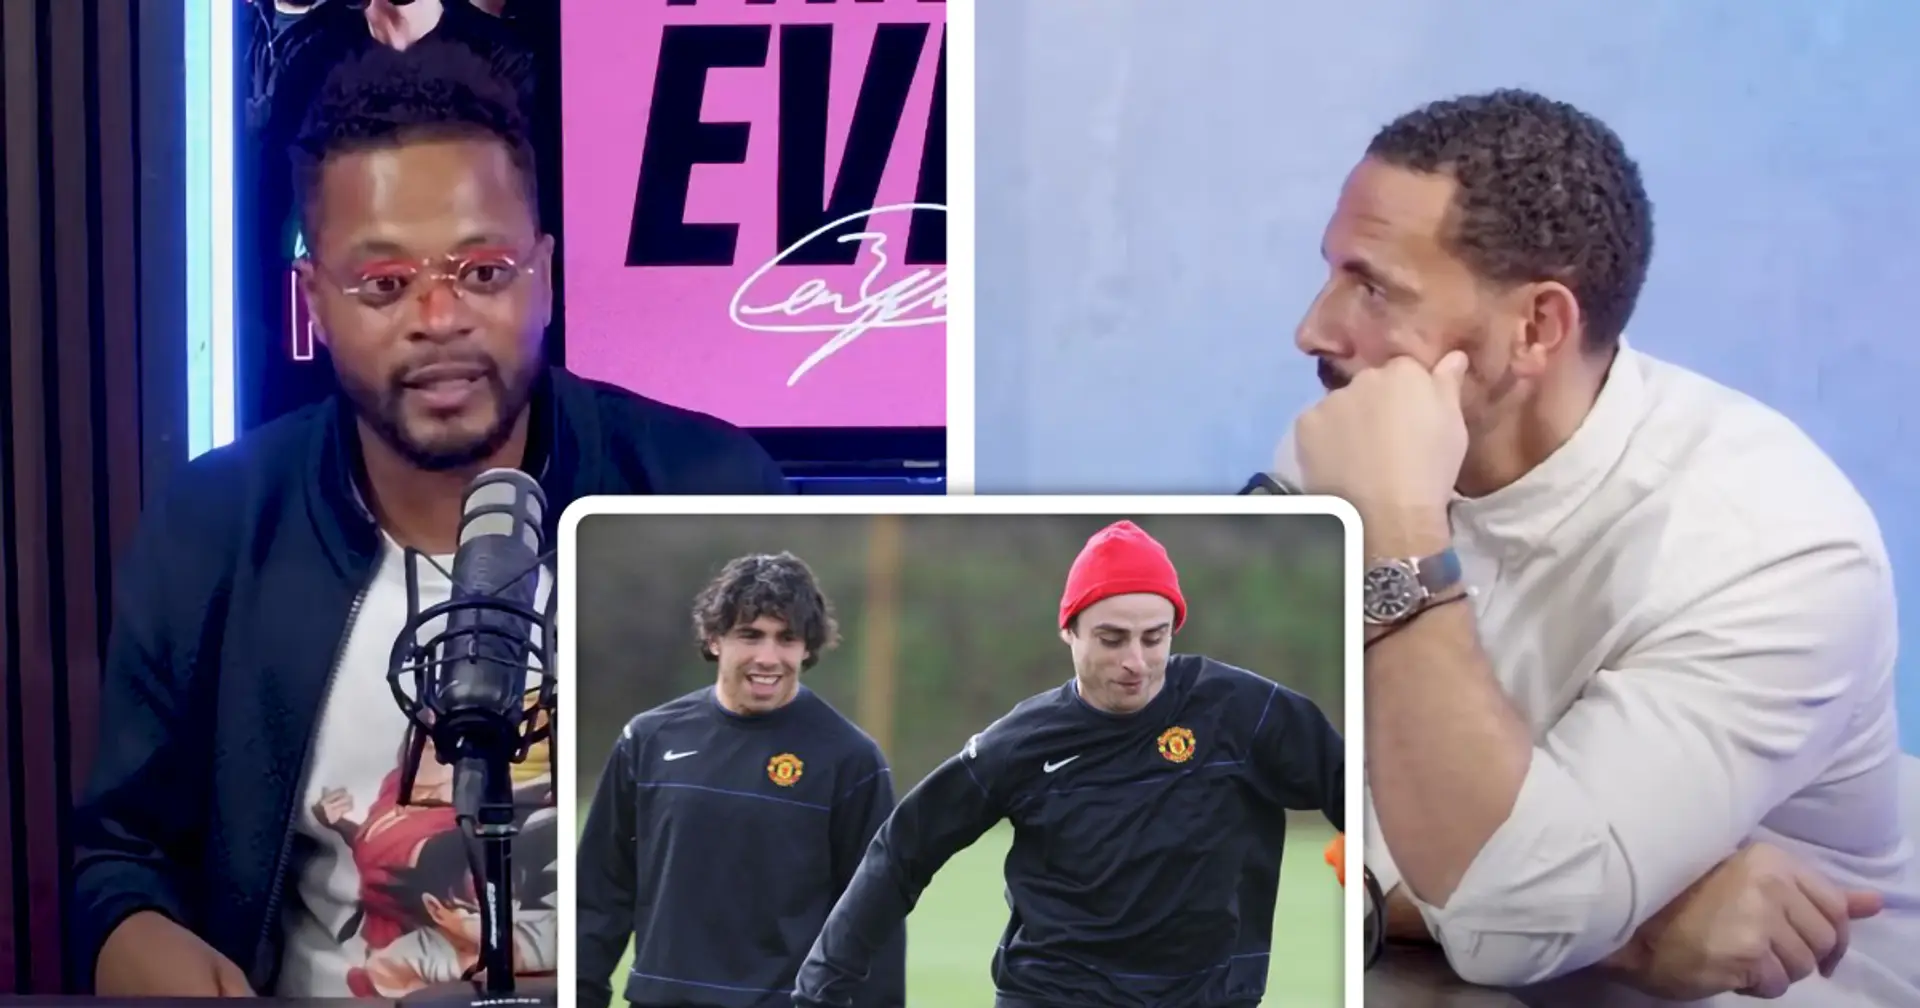 'He didn't even do his legs': Evra and Ferdinand name the worst player in training